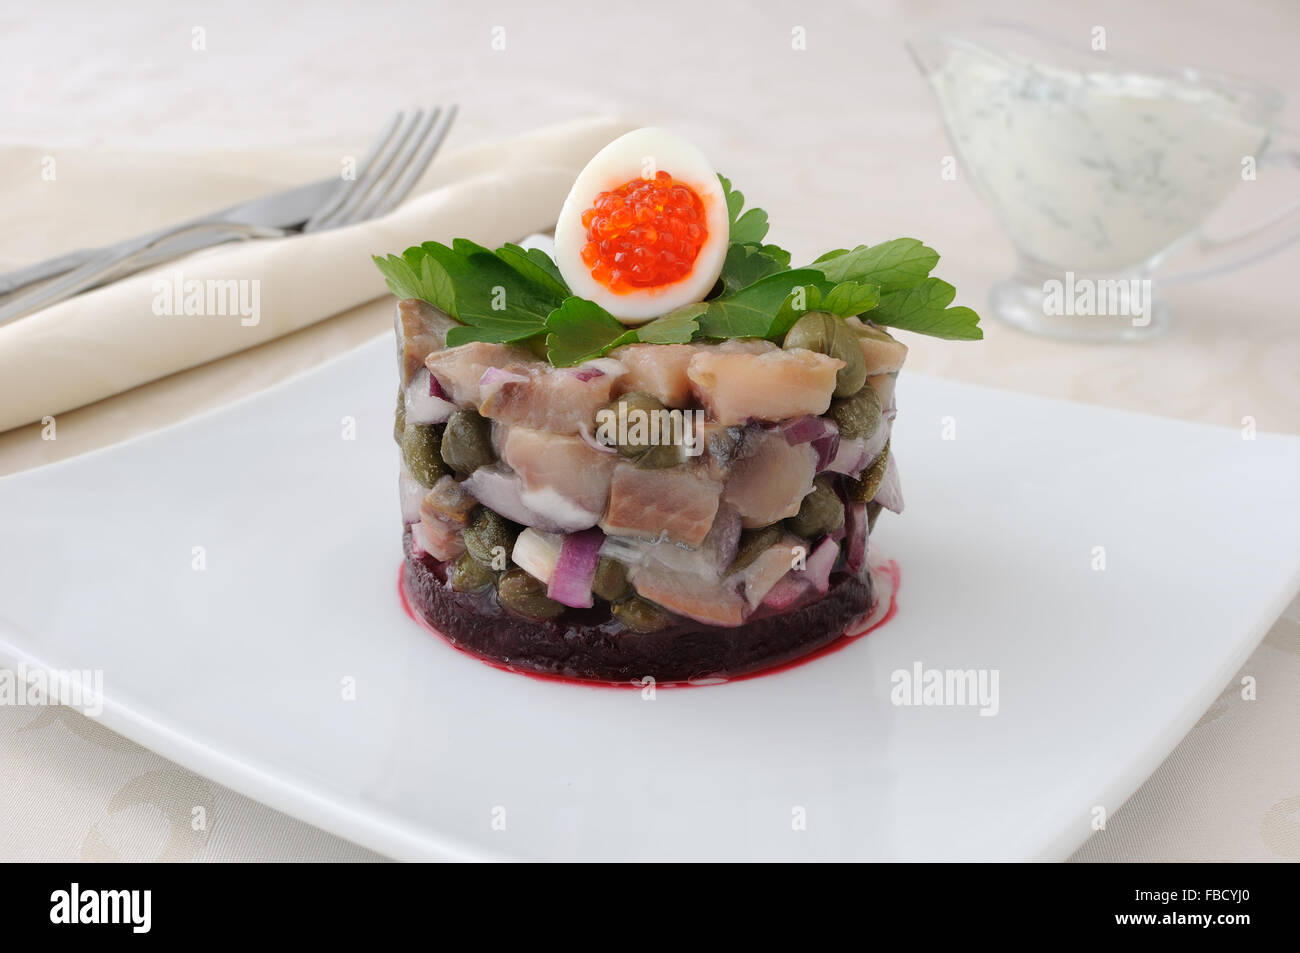 Herring tartare with capers and dill cream sauce Stock Photo